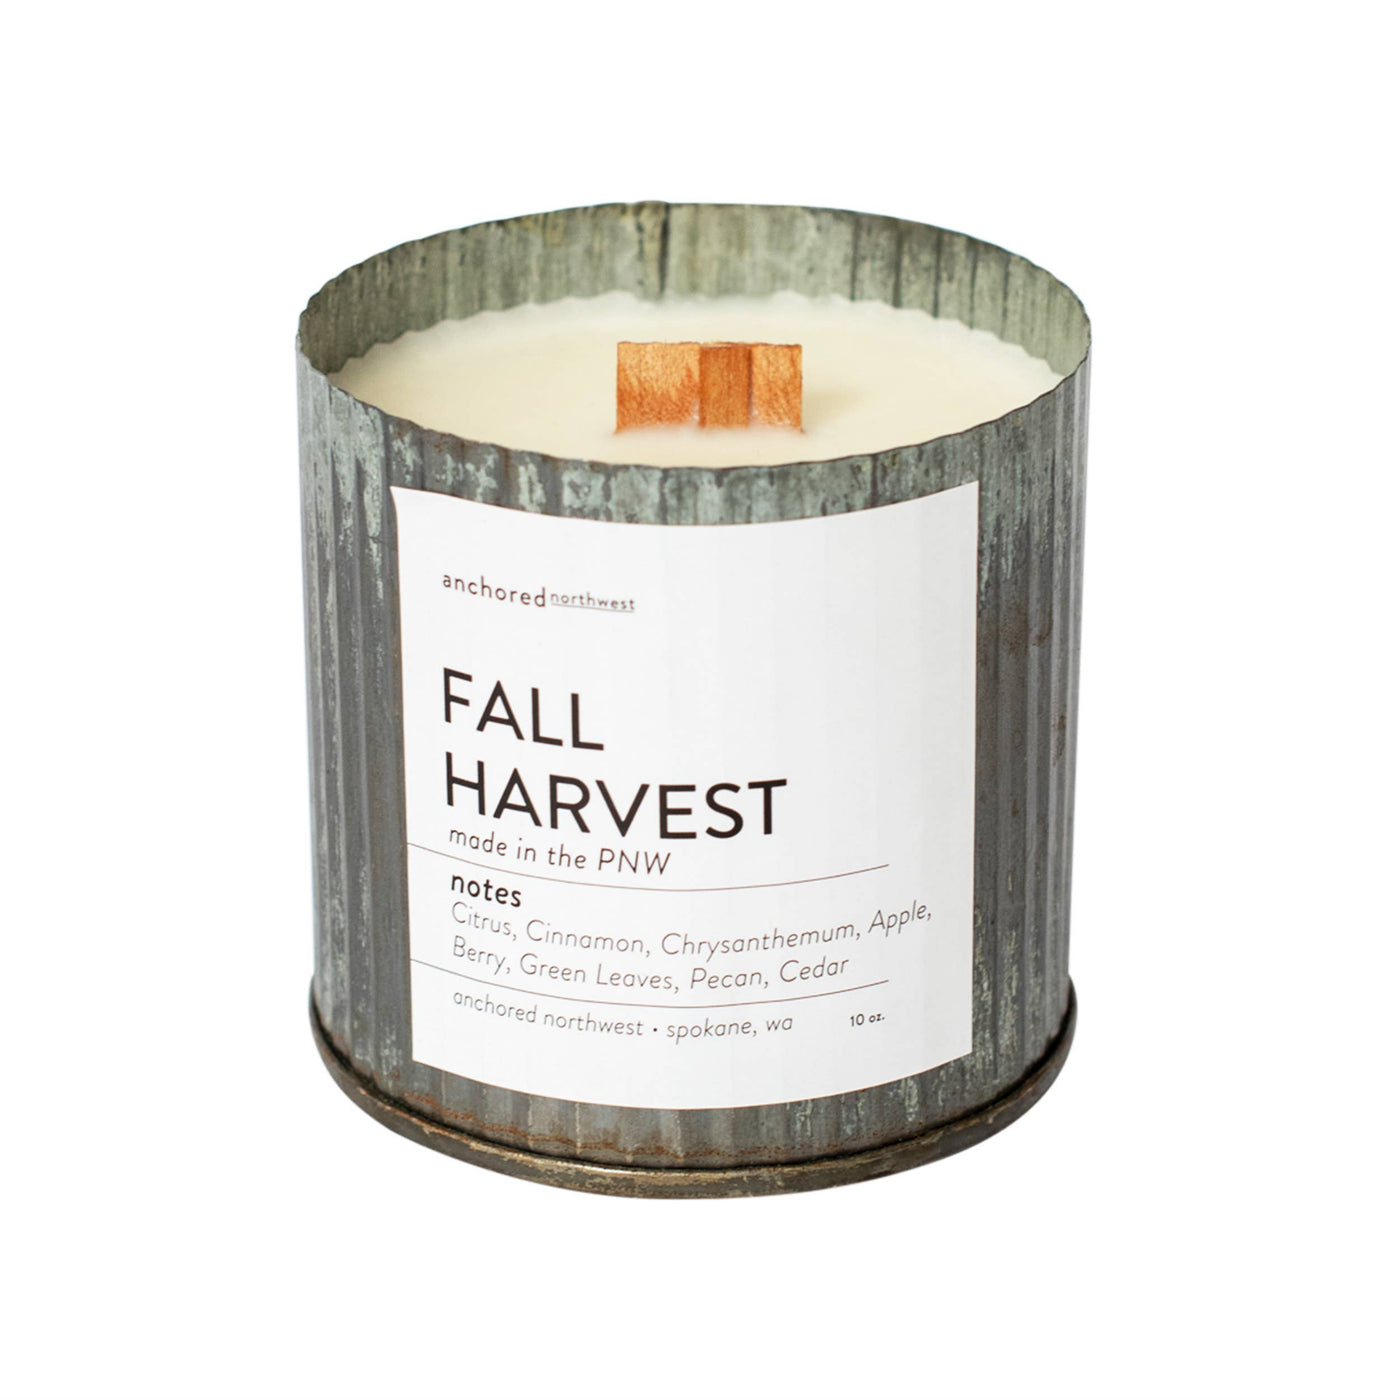 Fall Harvest Wood Wick Rustic Farmhouse Soy Candle: 10oz